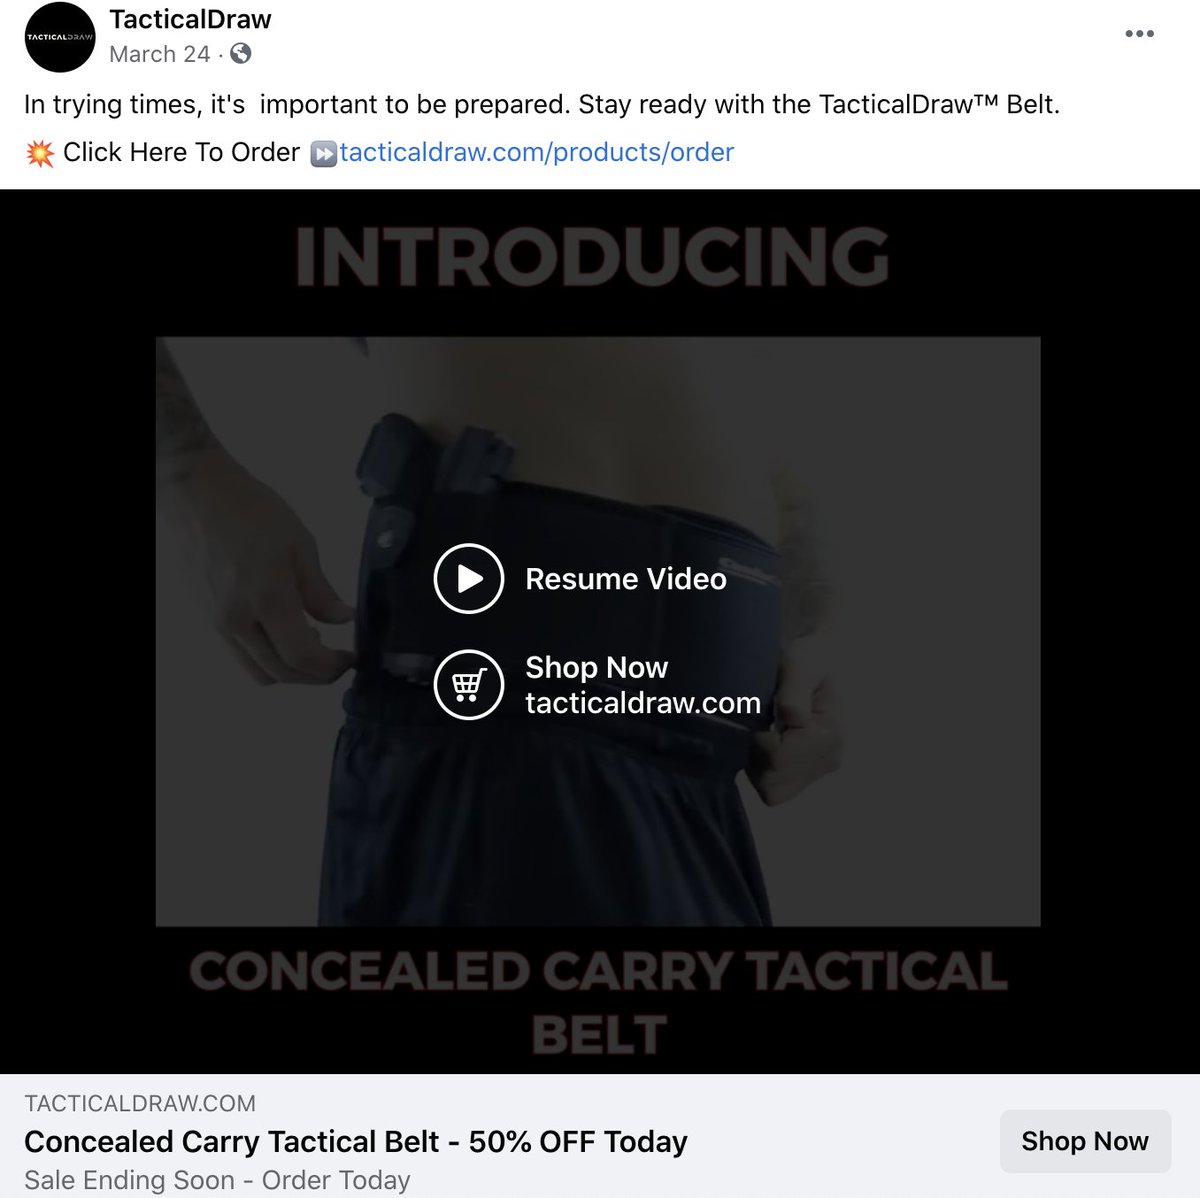 This product is pretty in line with the emotions we noticed many people in the world are feeling currently AND it fits right in with the massive increase in gun sales this year. The video plays to the fear of loss. People fear losing their life, belongings and loved ones.